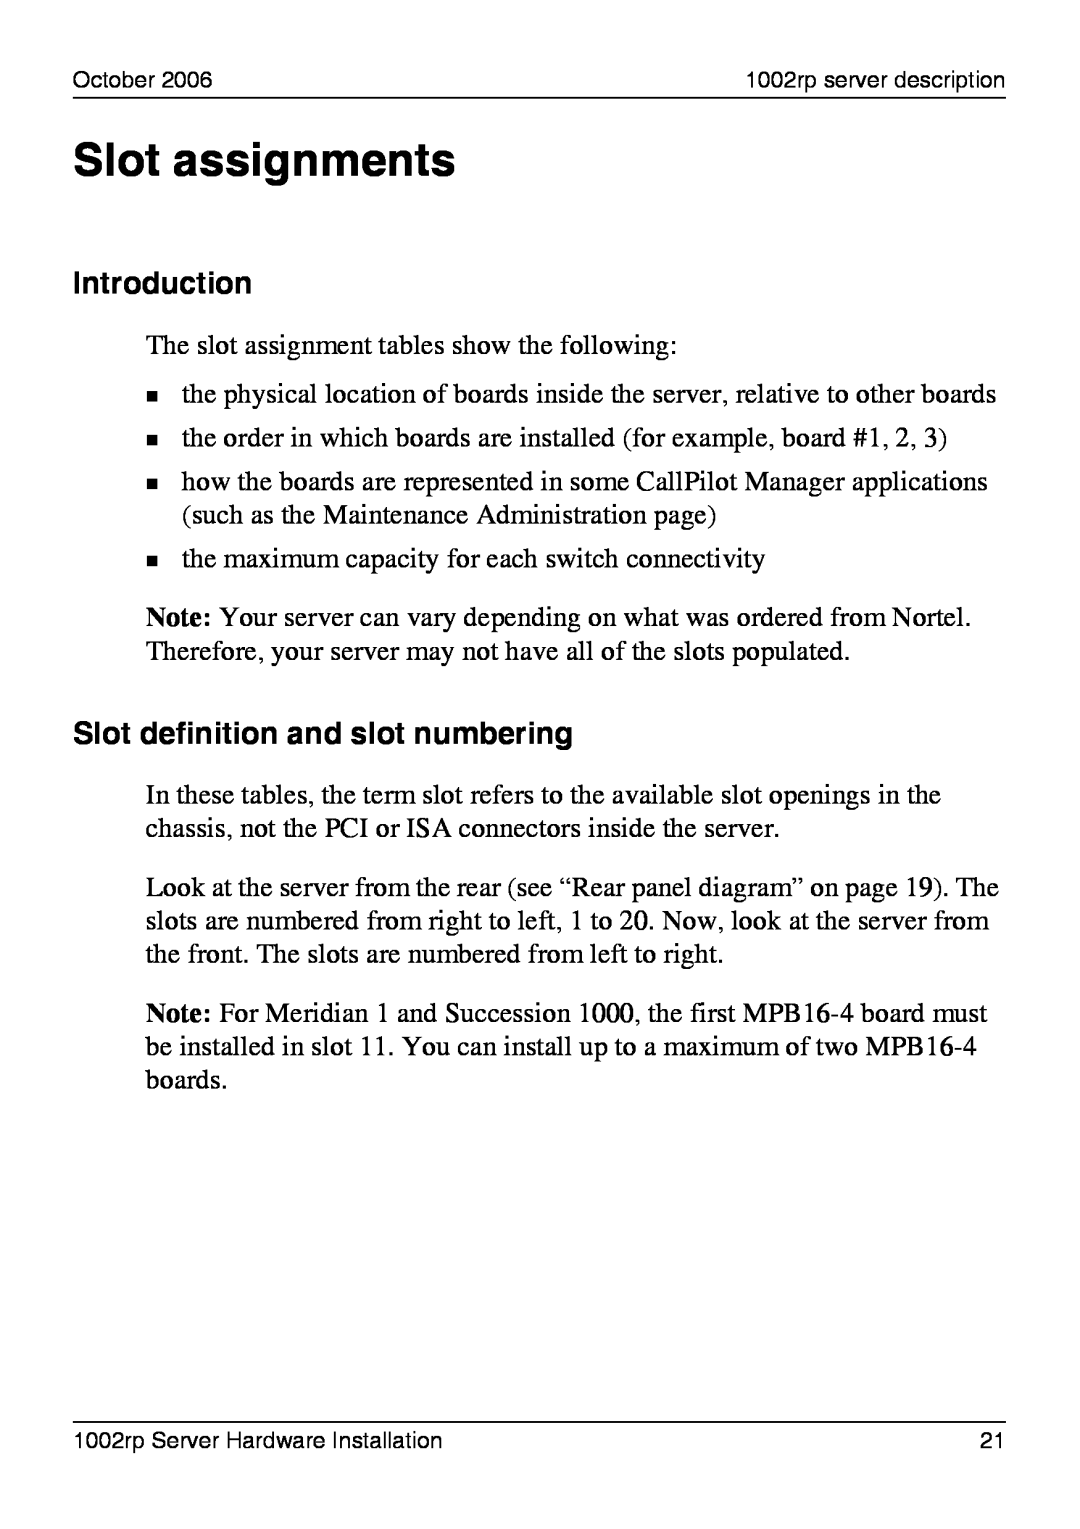 Nortel Networks 1002rp manual Slot assignments, Slot definition and slot numbering, Introduction 